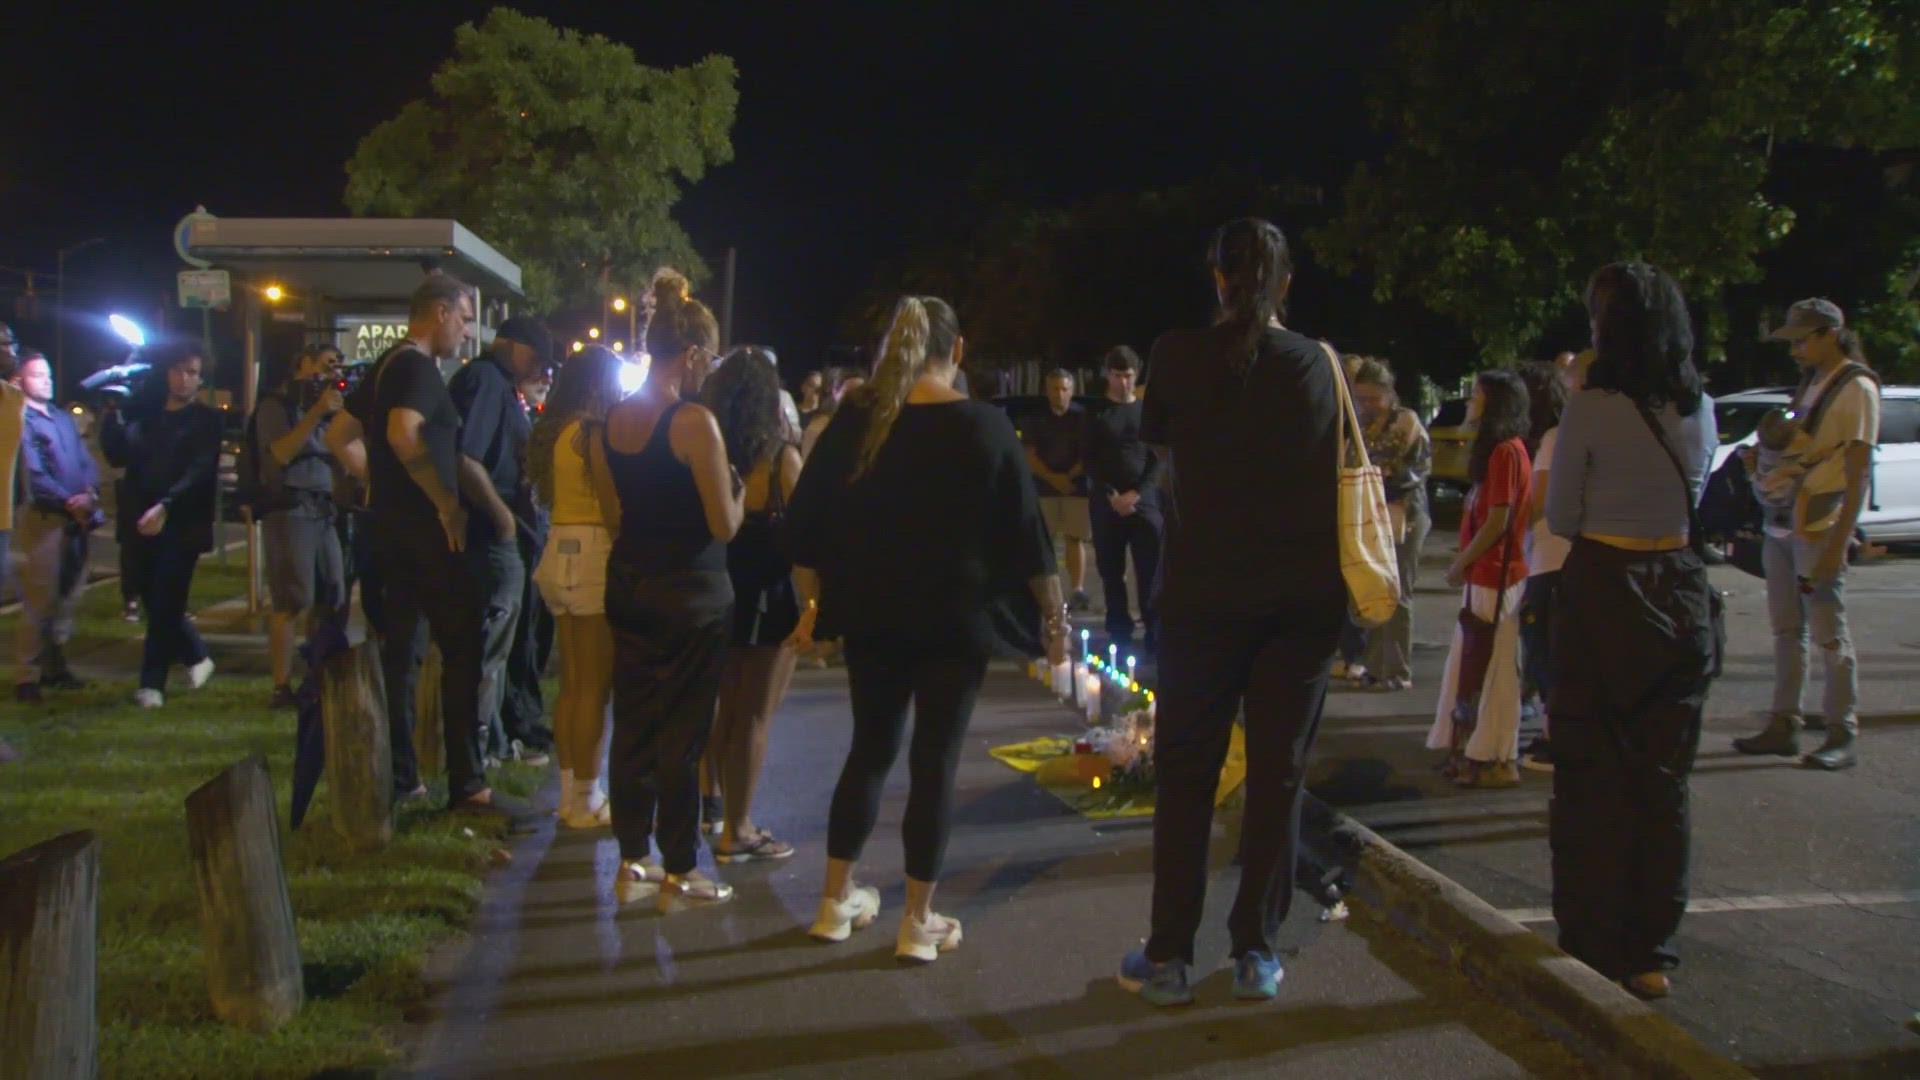 Orca advocates from Miami and across the country came together Saturday night to honor Tokitae's life and spirit.